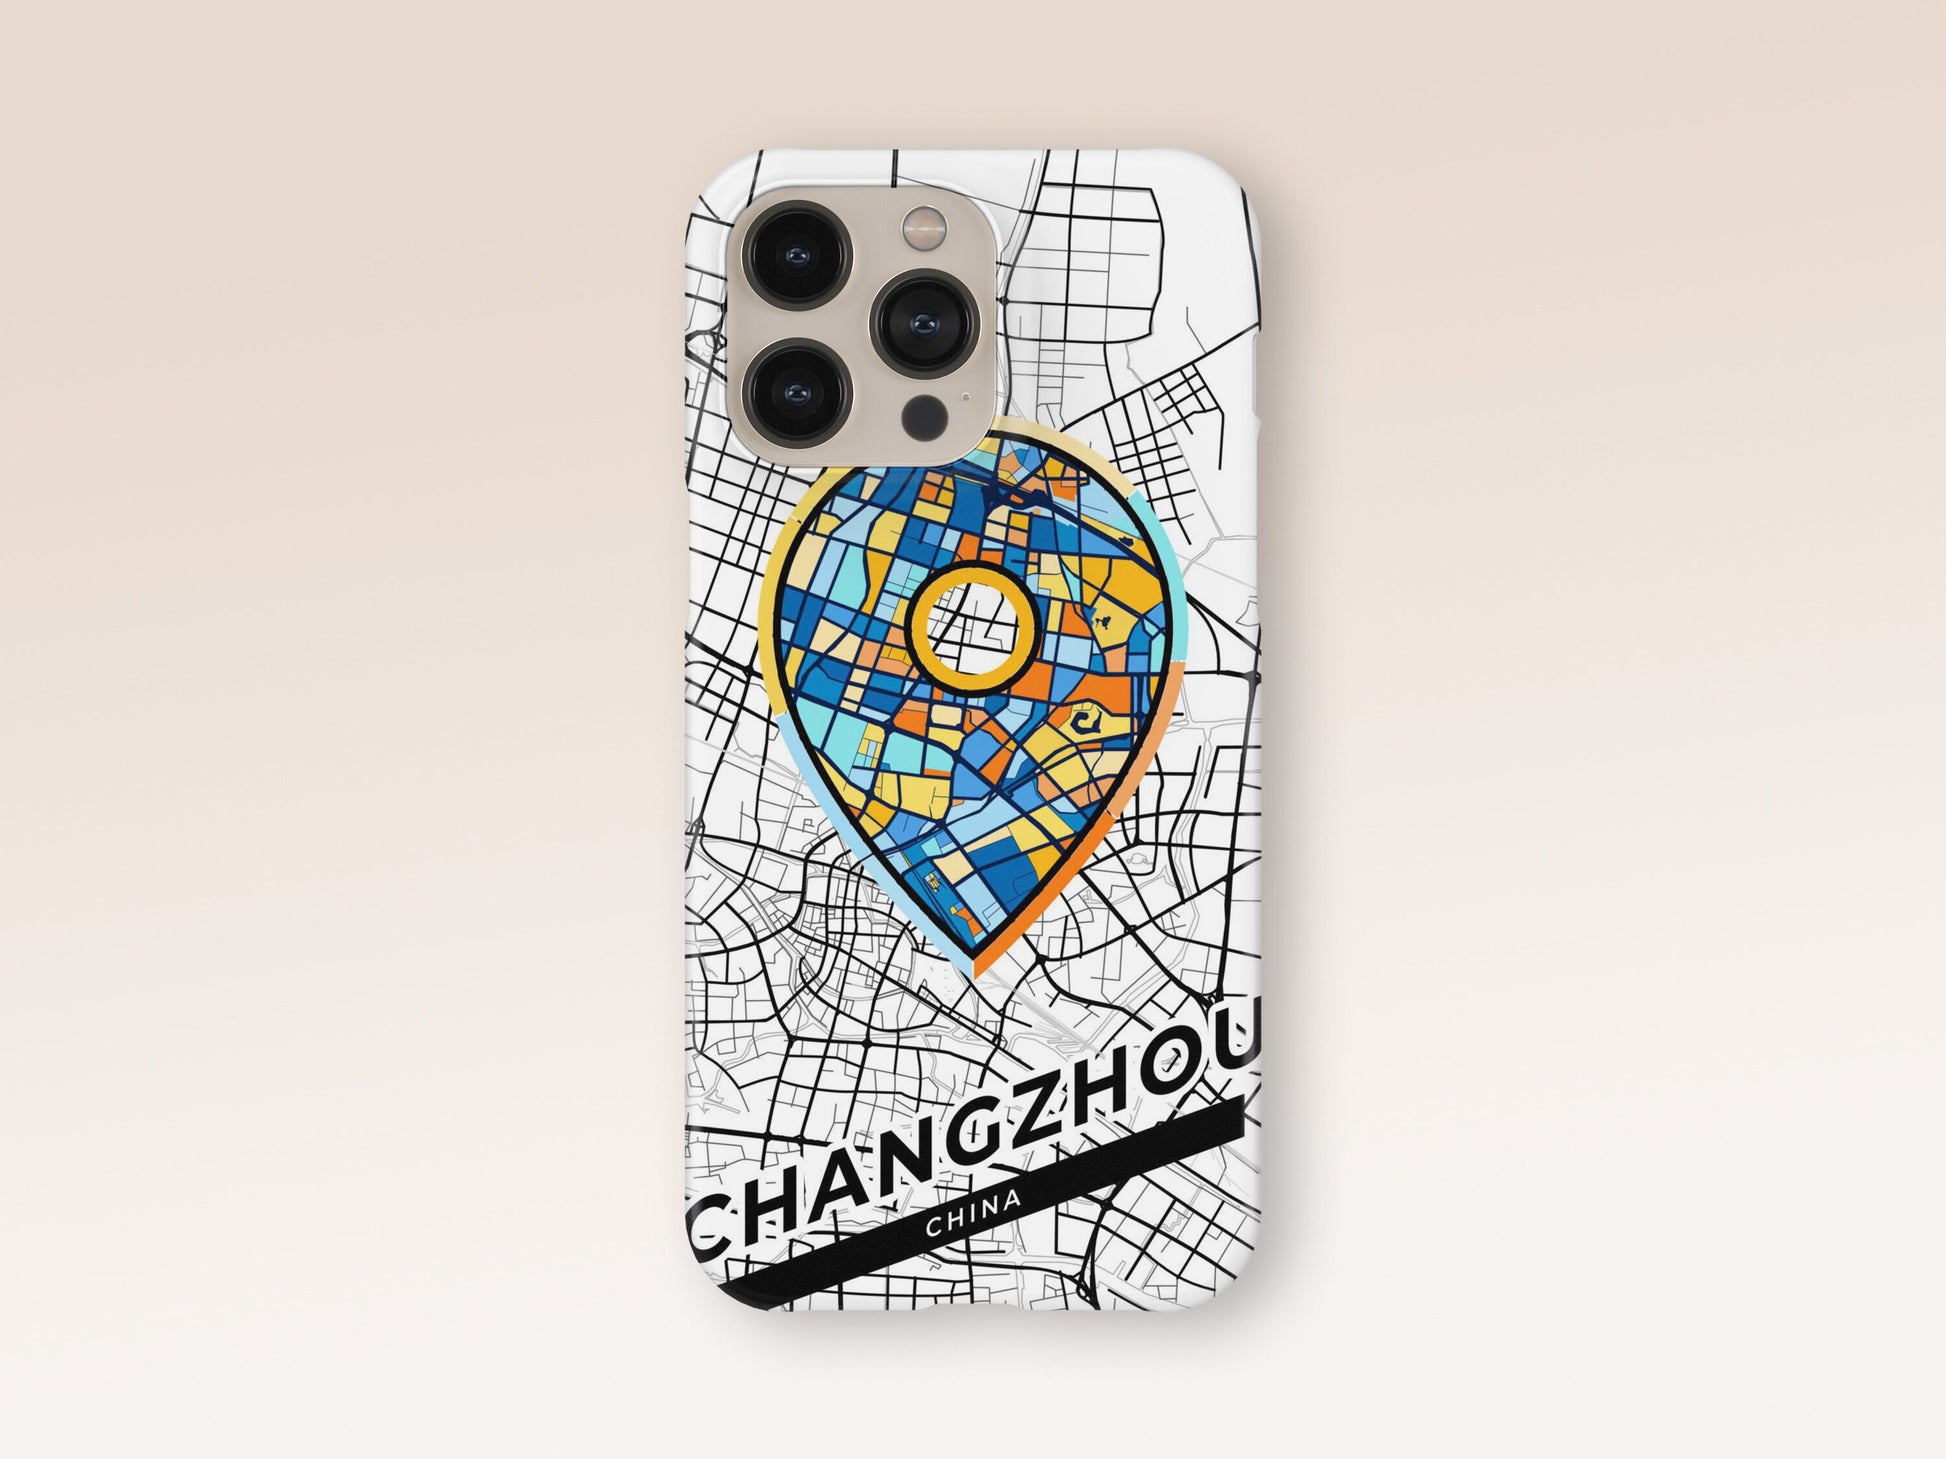 Changzhou China slim phone case with colorful icon. Birthday, wedding or housewarming gift. Couple match cases. 1